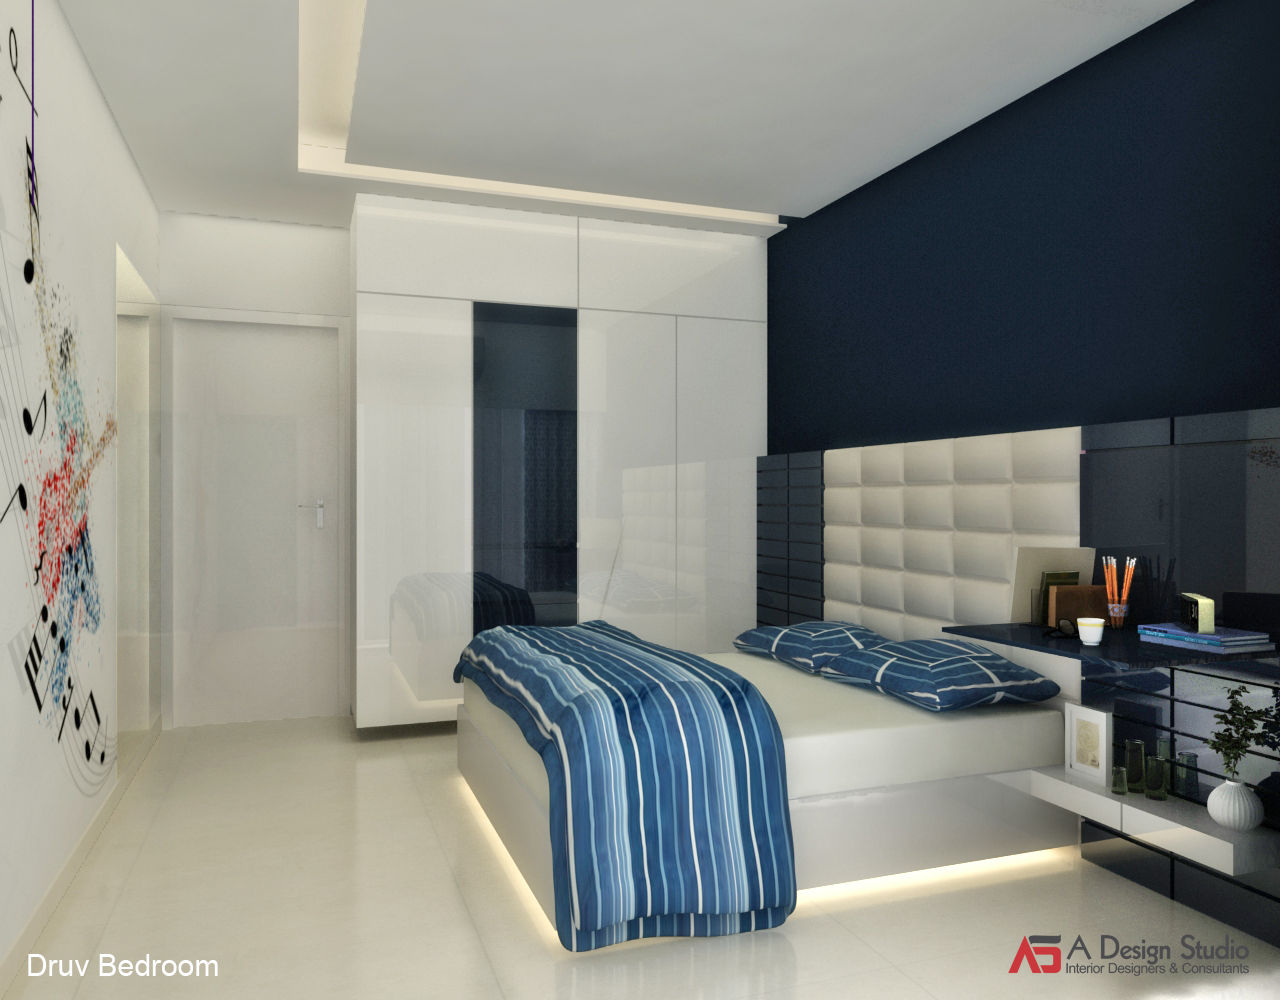 Bungalow at Alibaug, A Design Studio A Design Studio Modern style bedroom Wood Wood effect BLUE THEME,BED DESIGN,GRAPHICS,WARDROBE,CARPET,DARK WALL,WALL PAINTING,WOODEN PANELING,LEATHER HEADBOARD